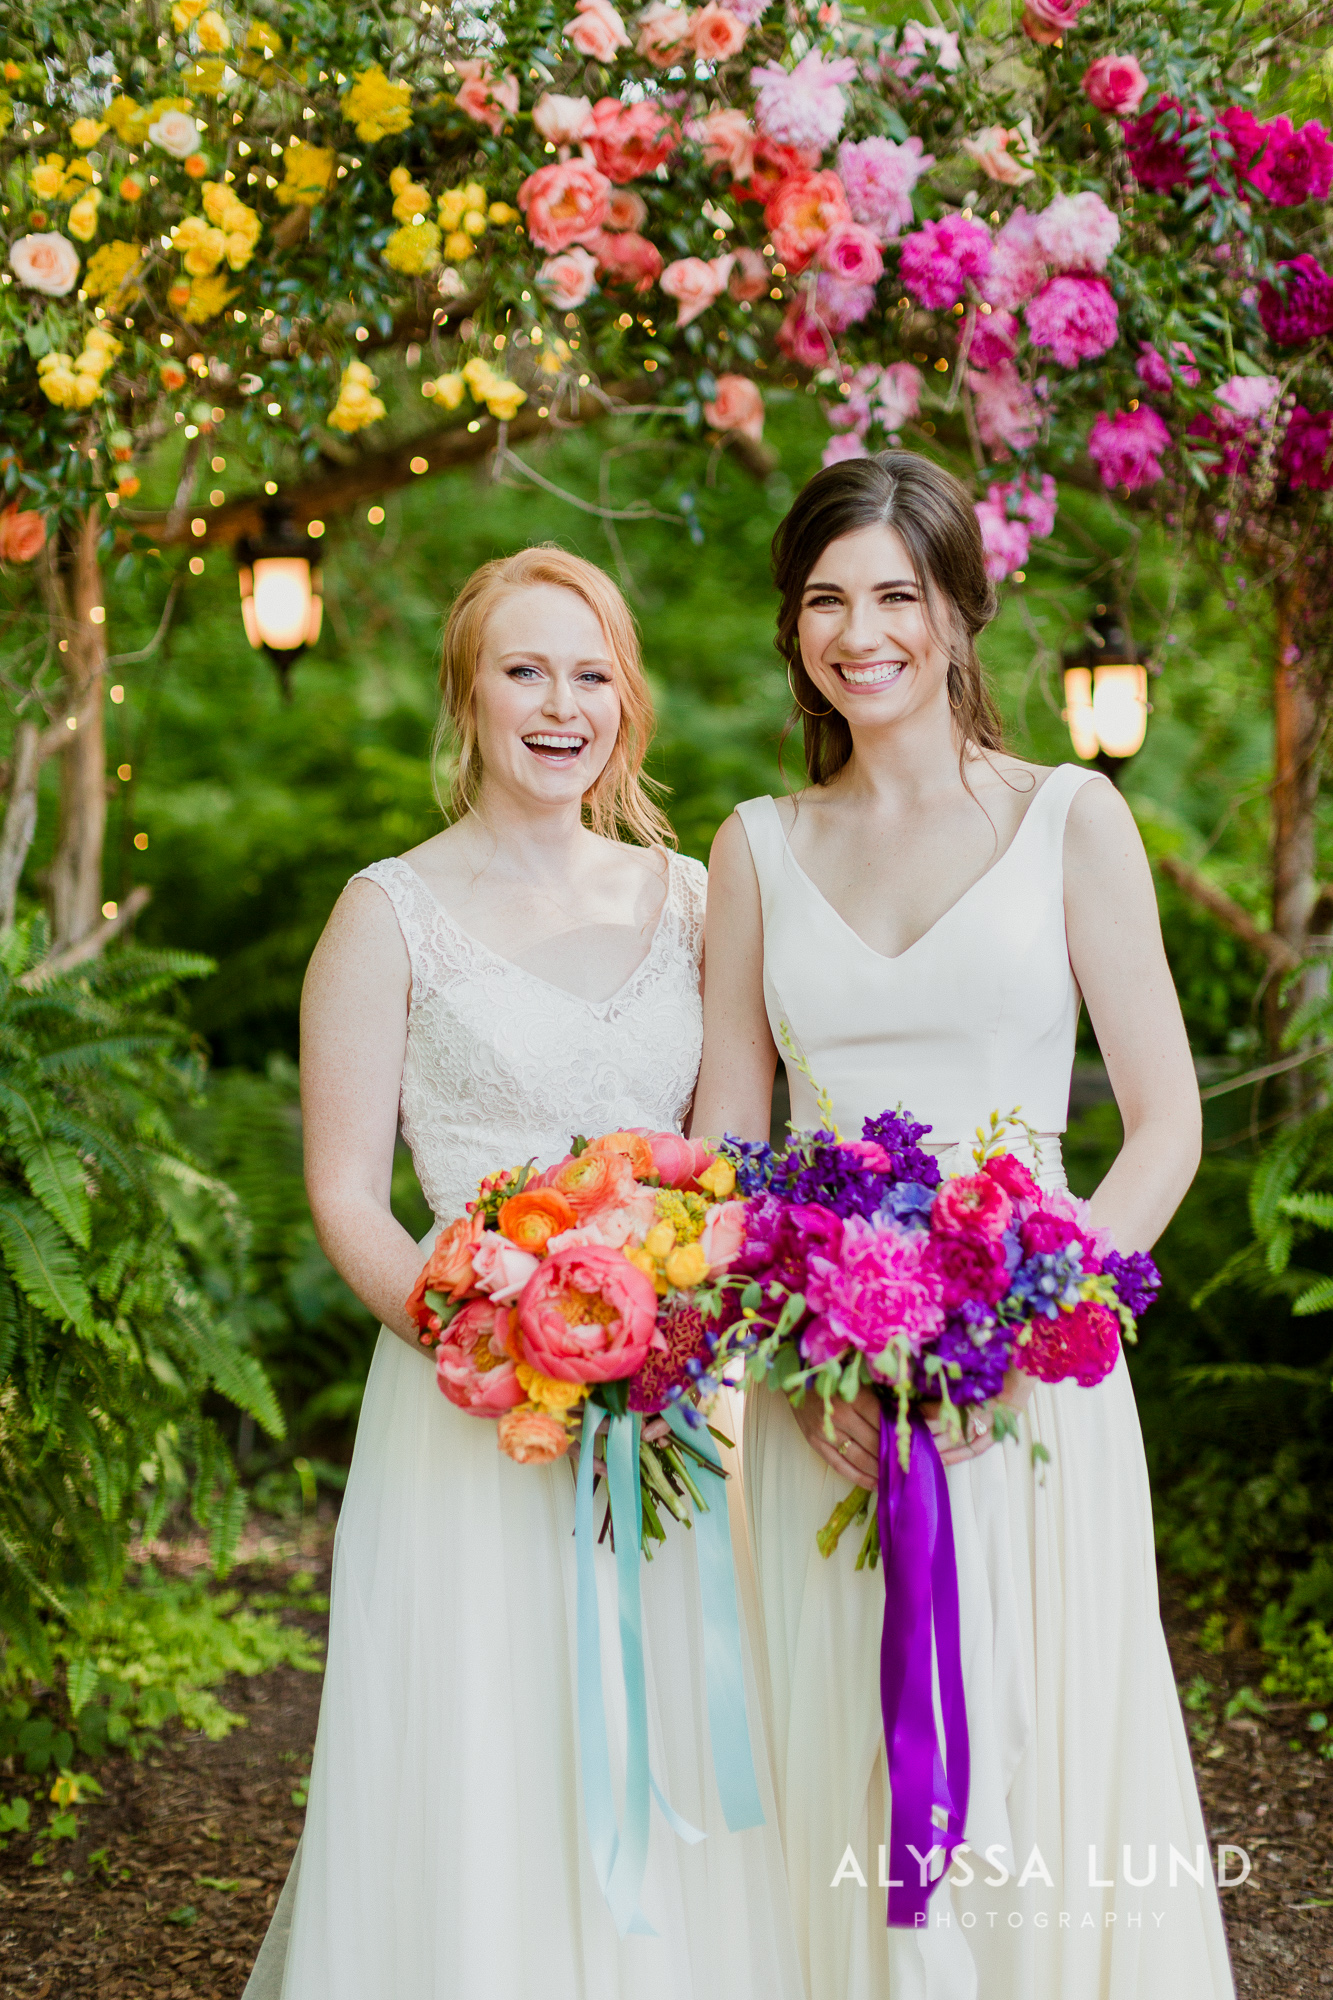 Queer wedding photography inspiration by Alyssa Lund Photography-26.jpg